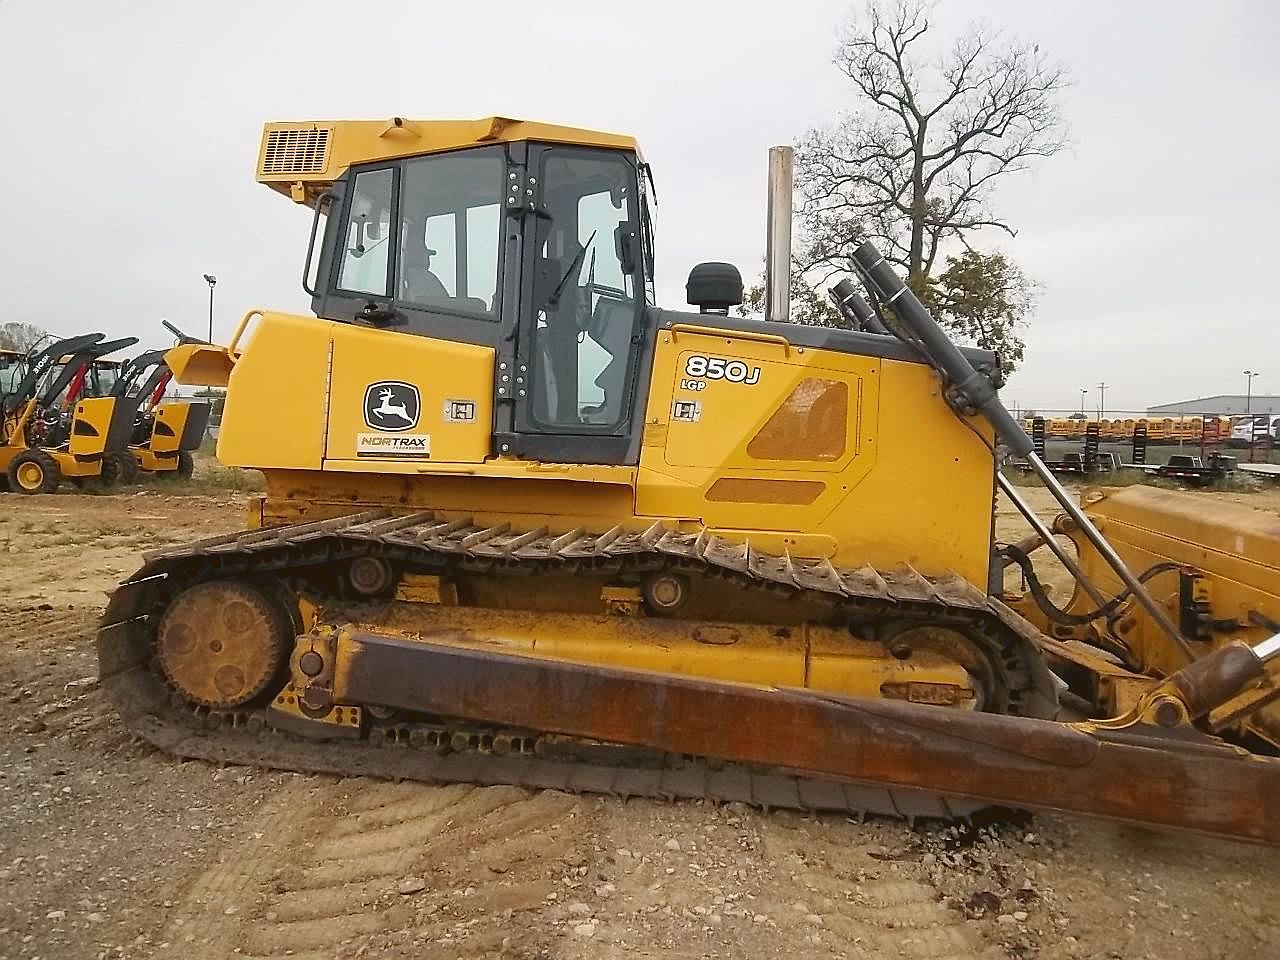 Used Construction Equipment - Find New & Used Construction ...